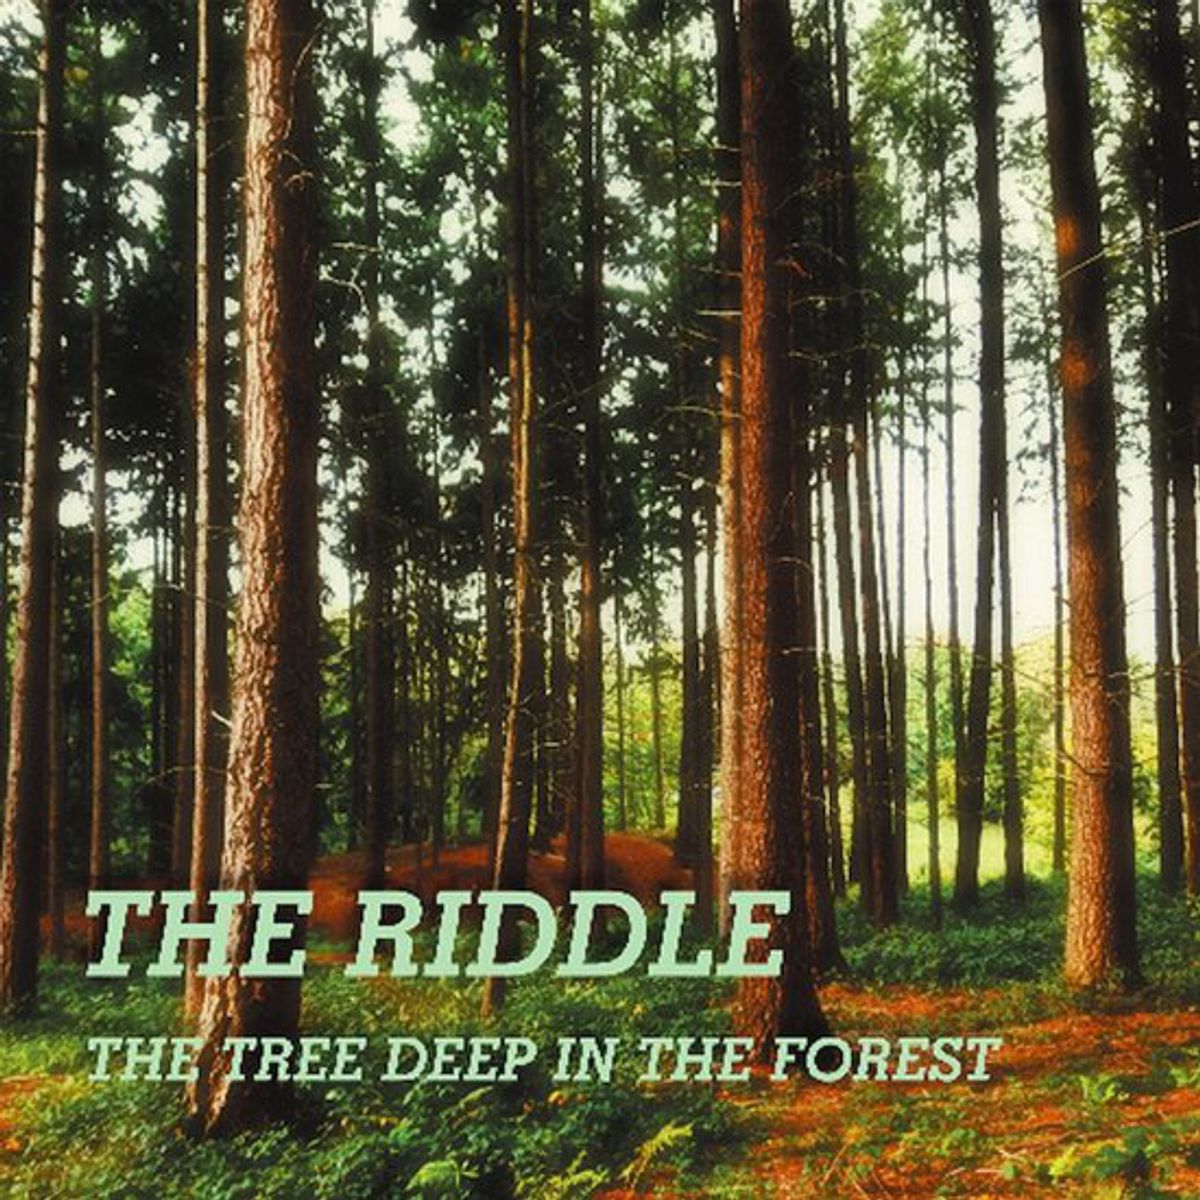 The Riddle - 'The Tree Deep In The Forest'